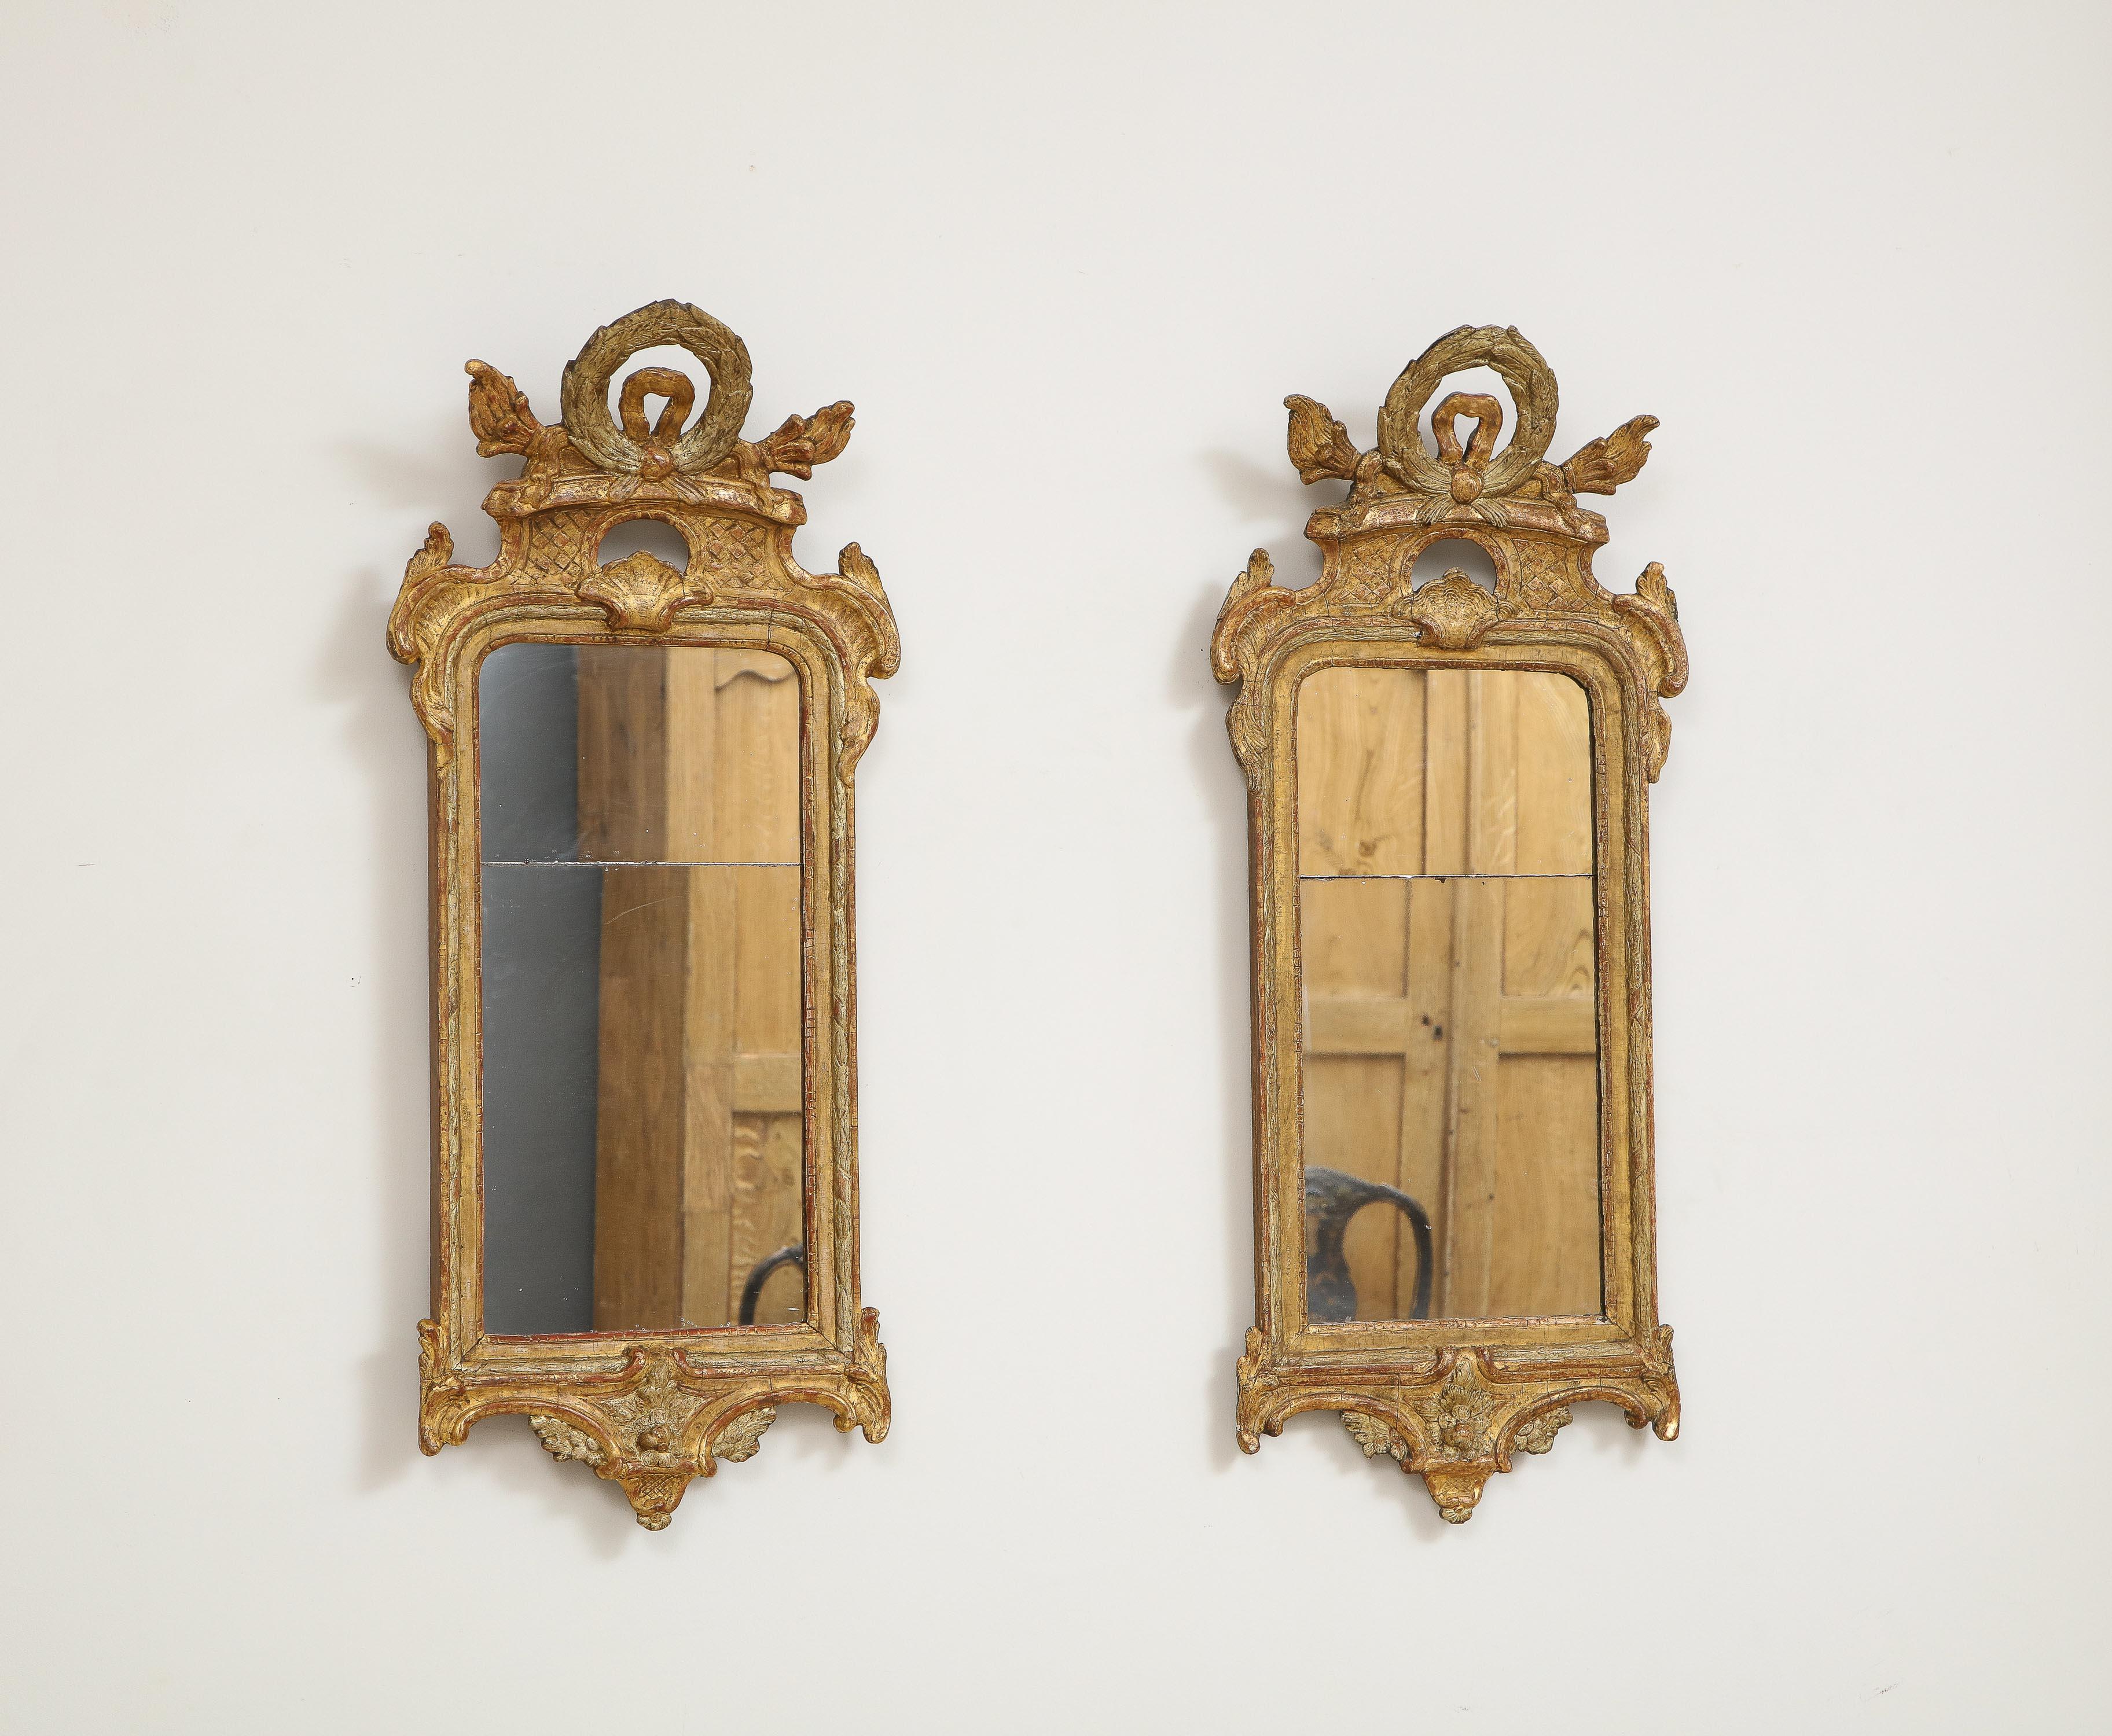 Olaf Wetterberg (1745 Sweden 1803), Rococo mirrors, pair, circa 1760, giltwood with original plates.

A peculiarity of Swedish mirrors, well into the 19th century, is that in all but the grandest contexts they are made in two parts. This was not due